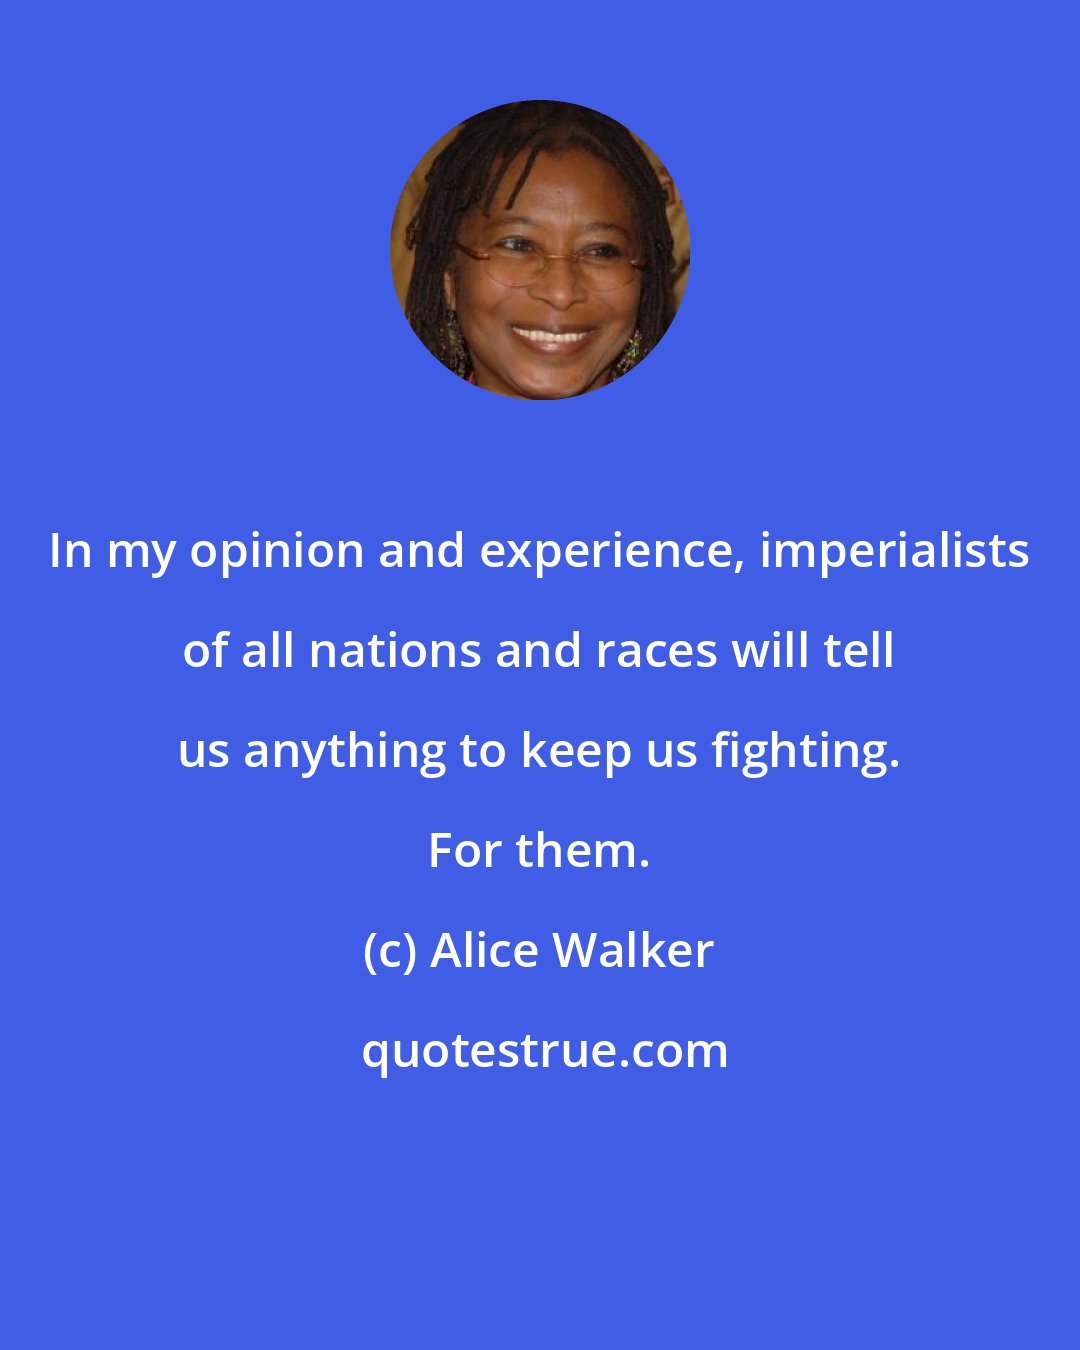 Alice Walker: In my opinion and experience, imperialists of all nations and races will tell us anything to keep us fighting. For them.